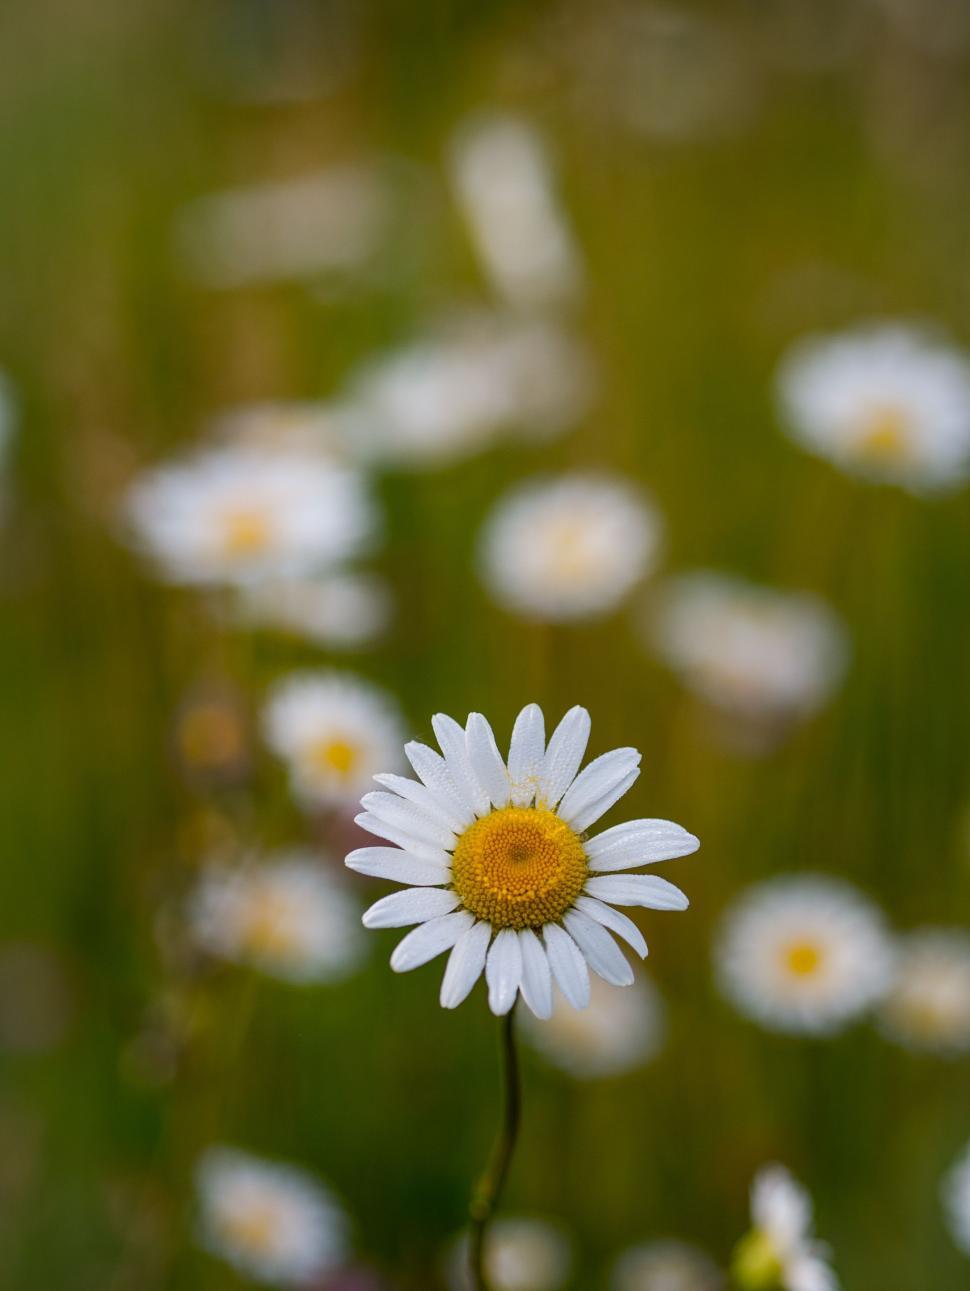 Free Image of Lone White Daisy Amidst Field of Daisies 